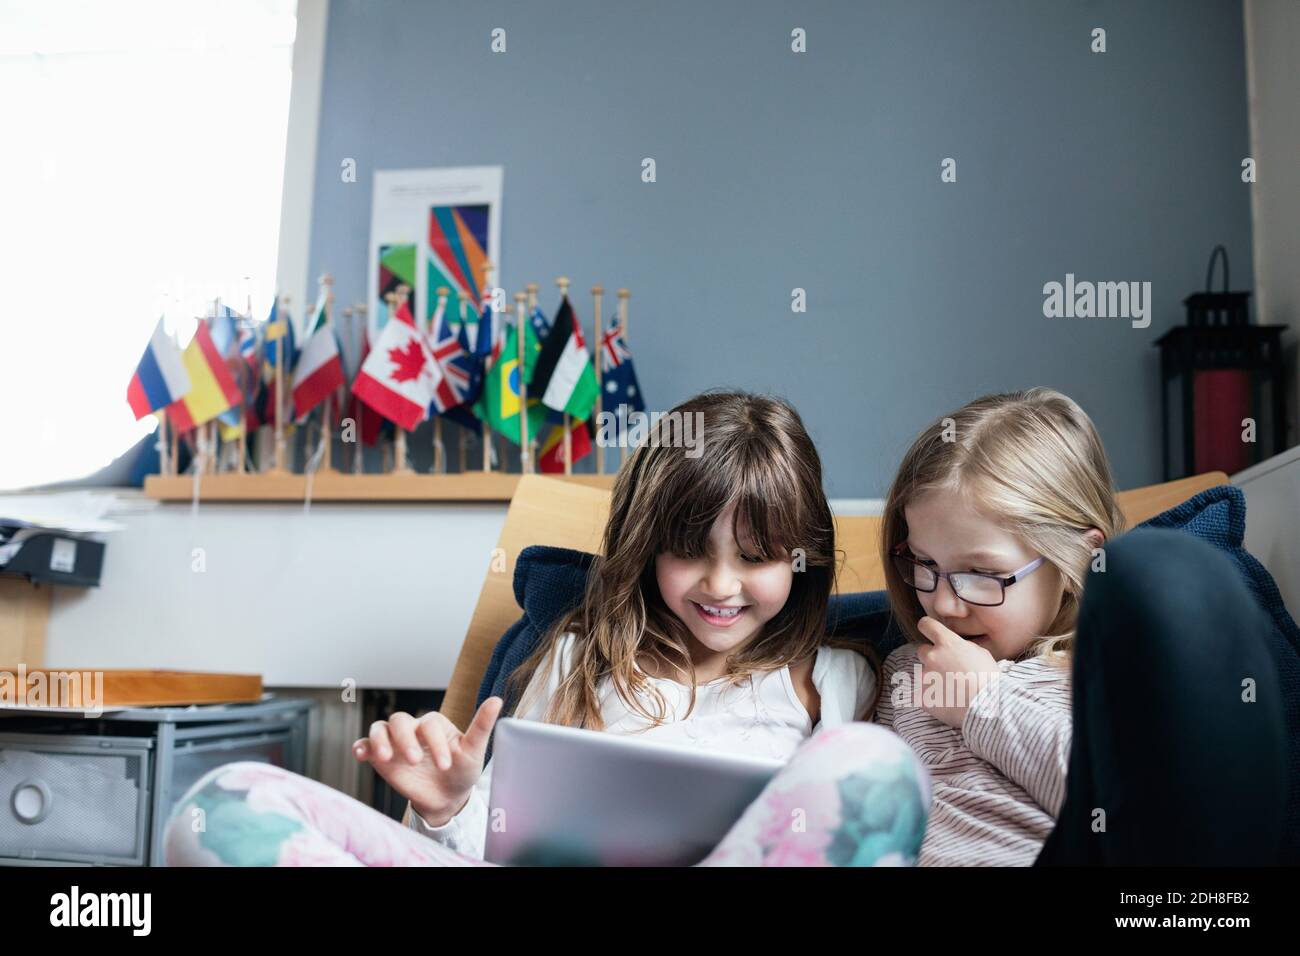 Smiling friends using digital tablet while sitting on sofa in school Stock Photo